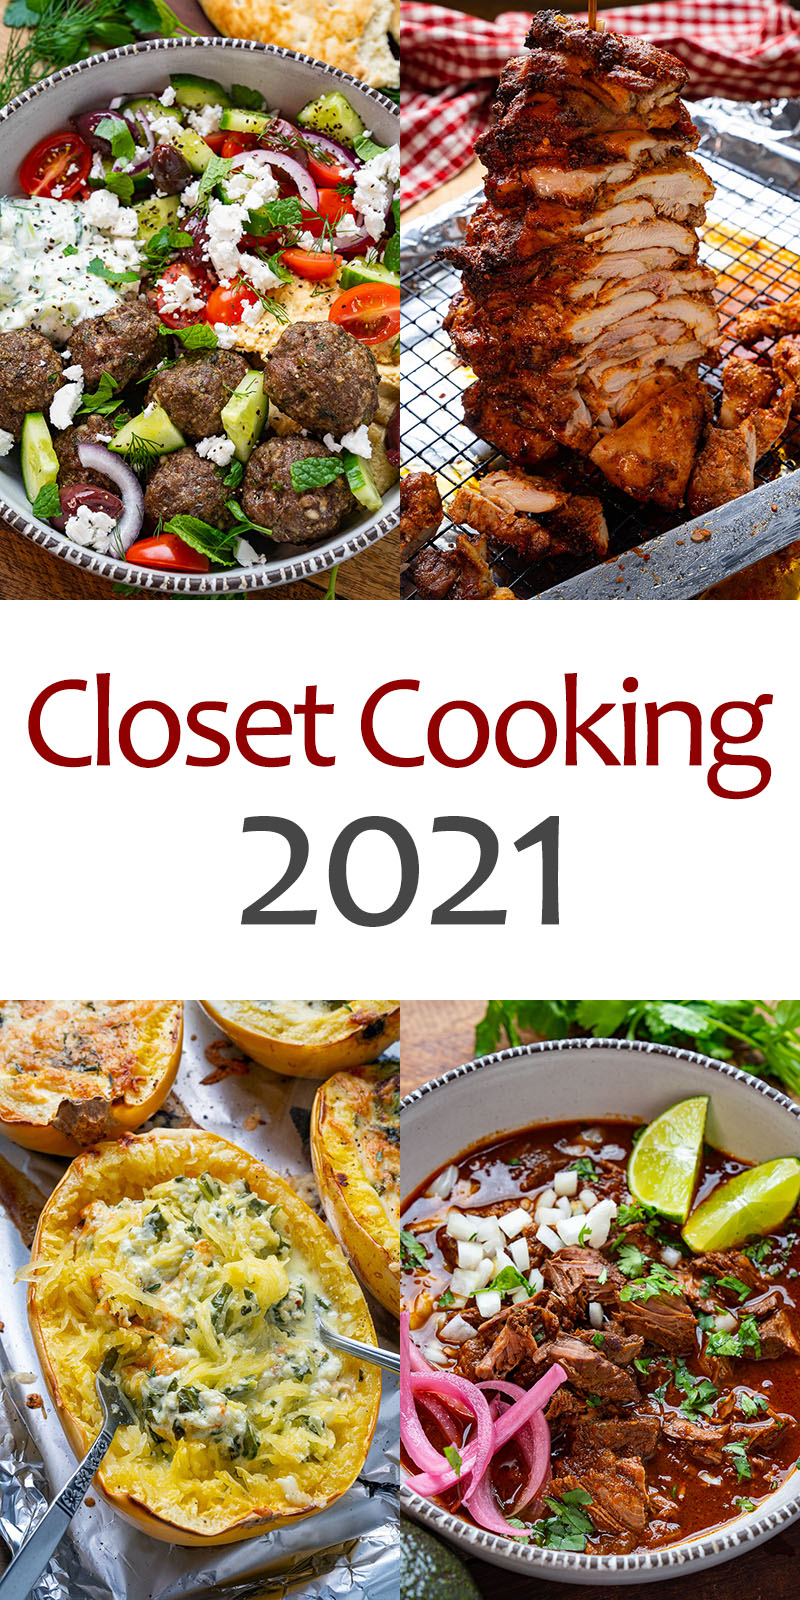 My Favourite Recipes of 2021